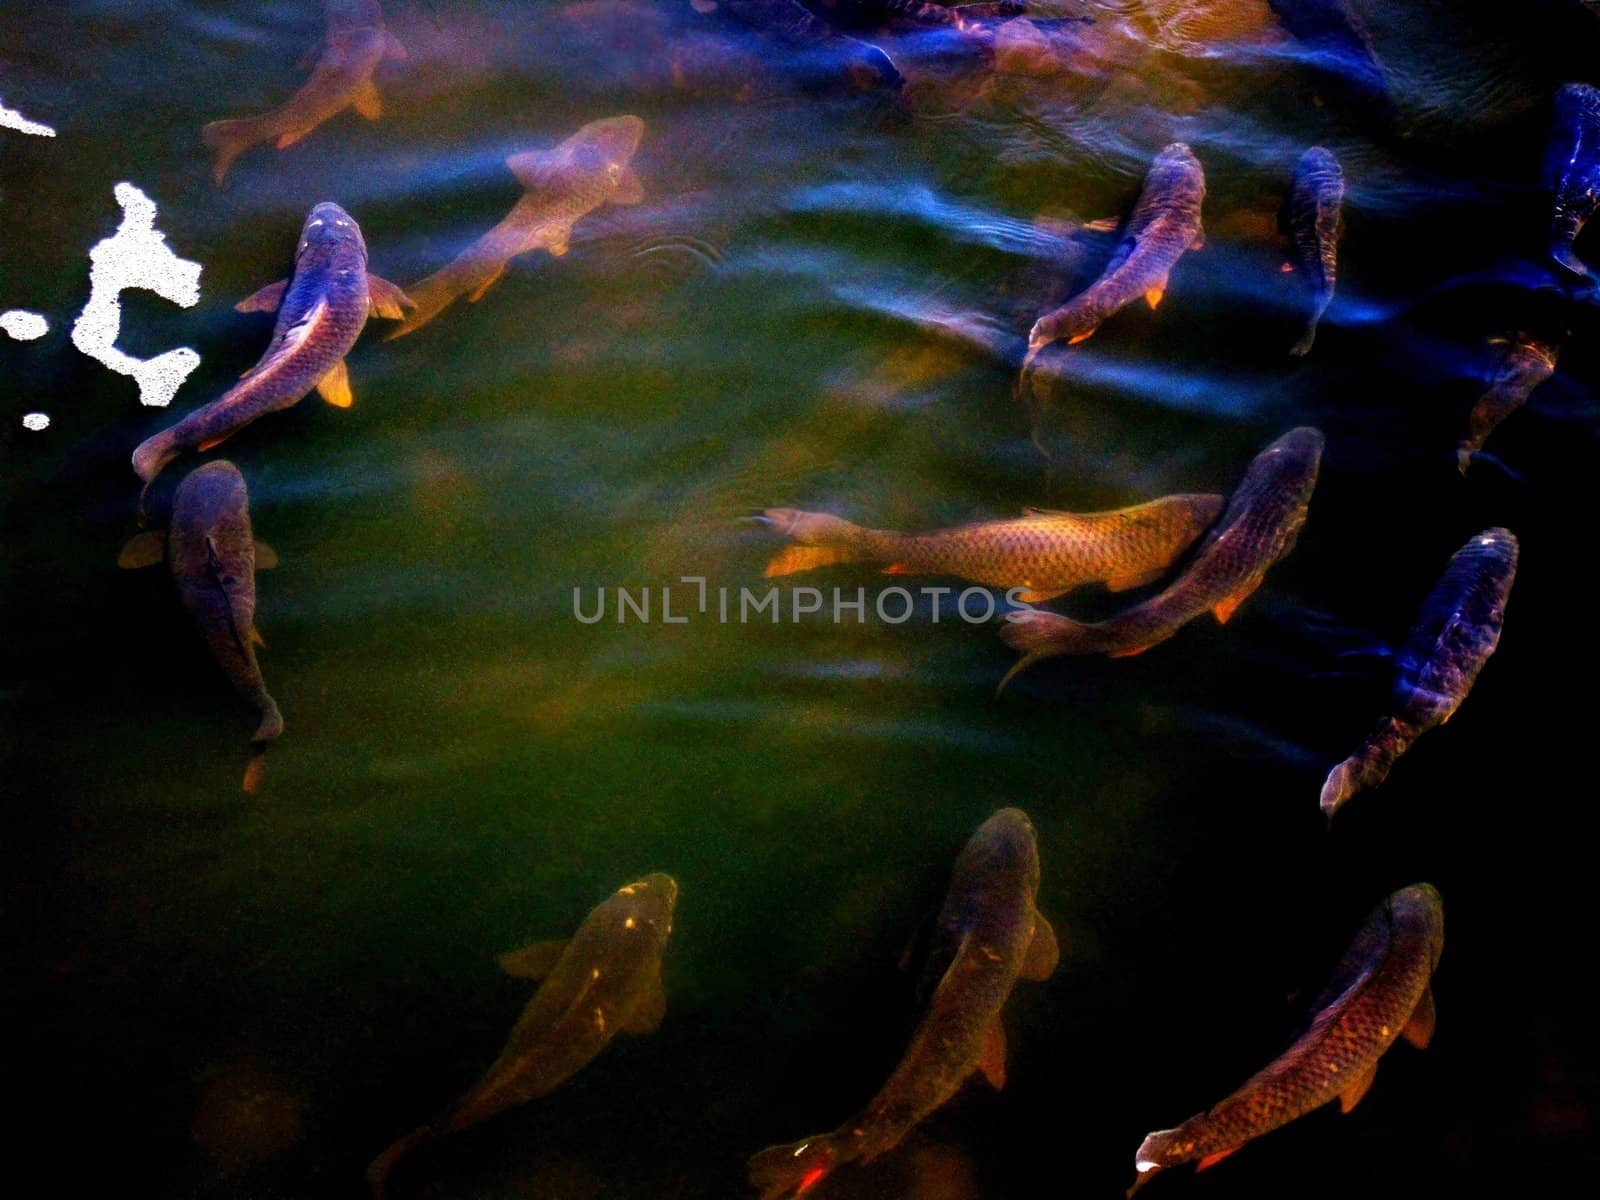 Swimming Carp by BrianneLeeHoffman